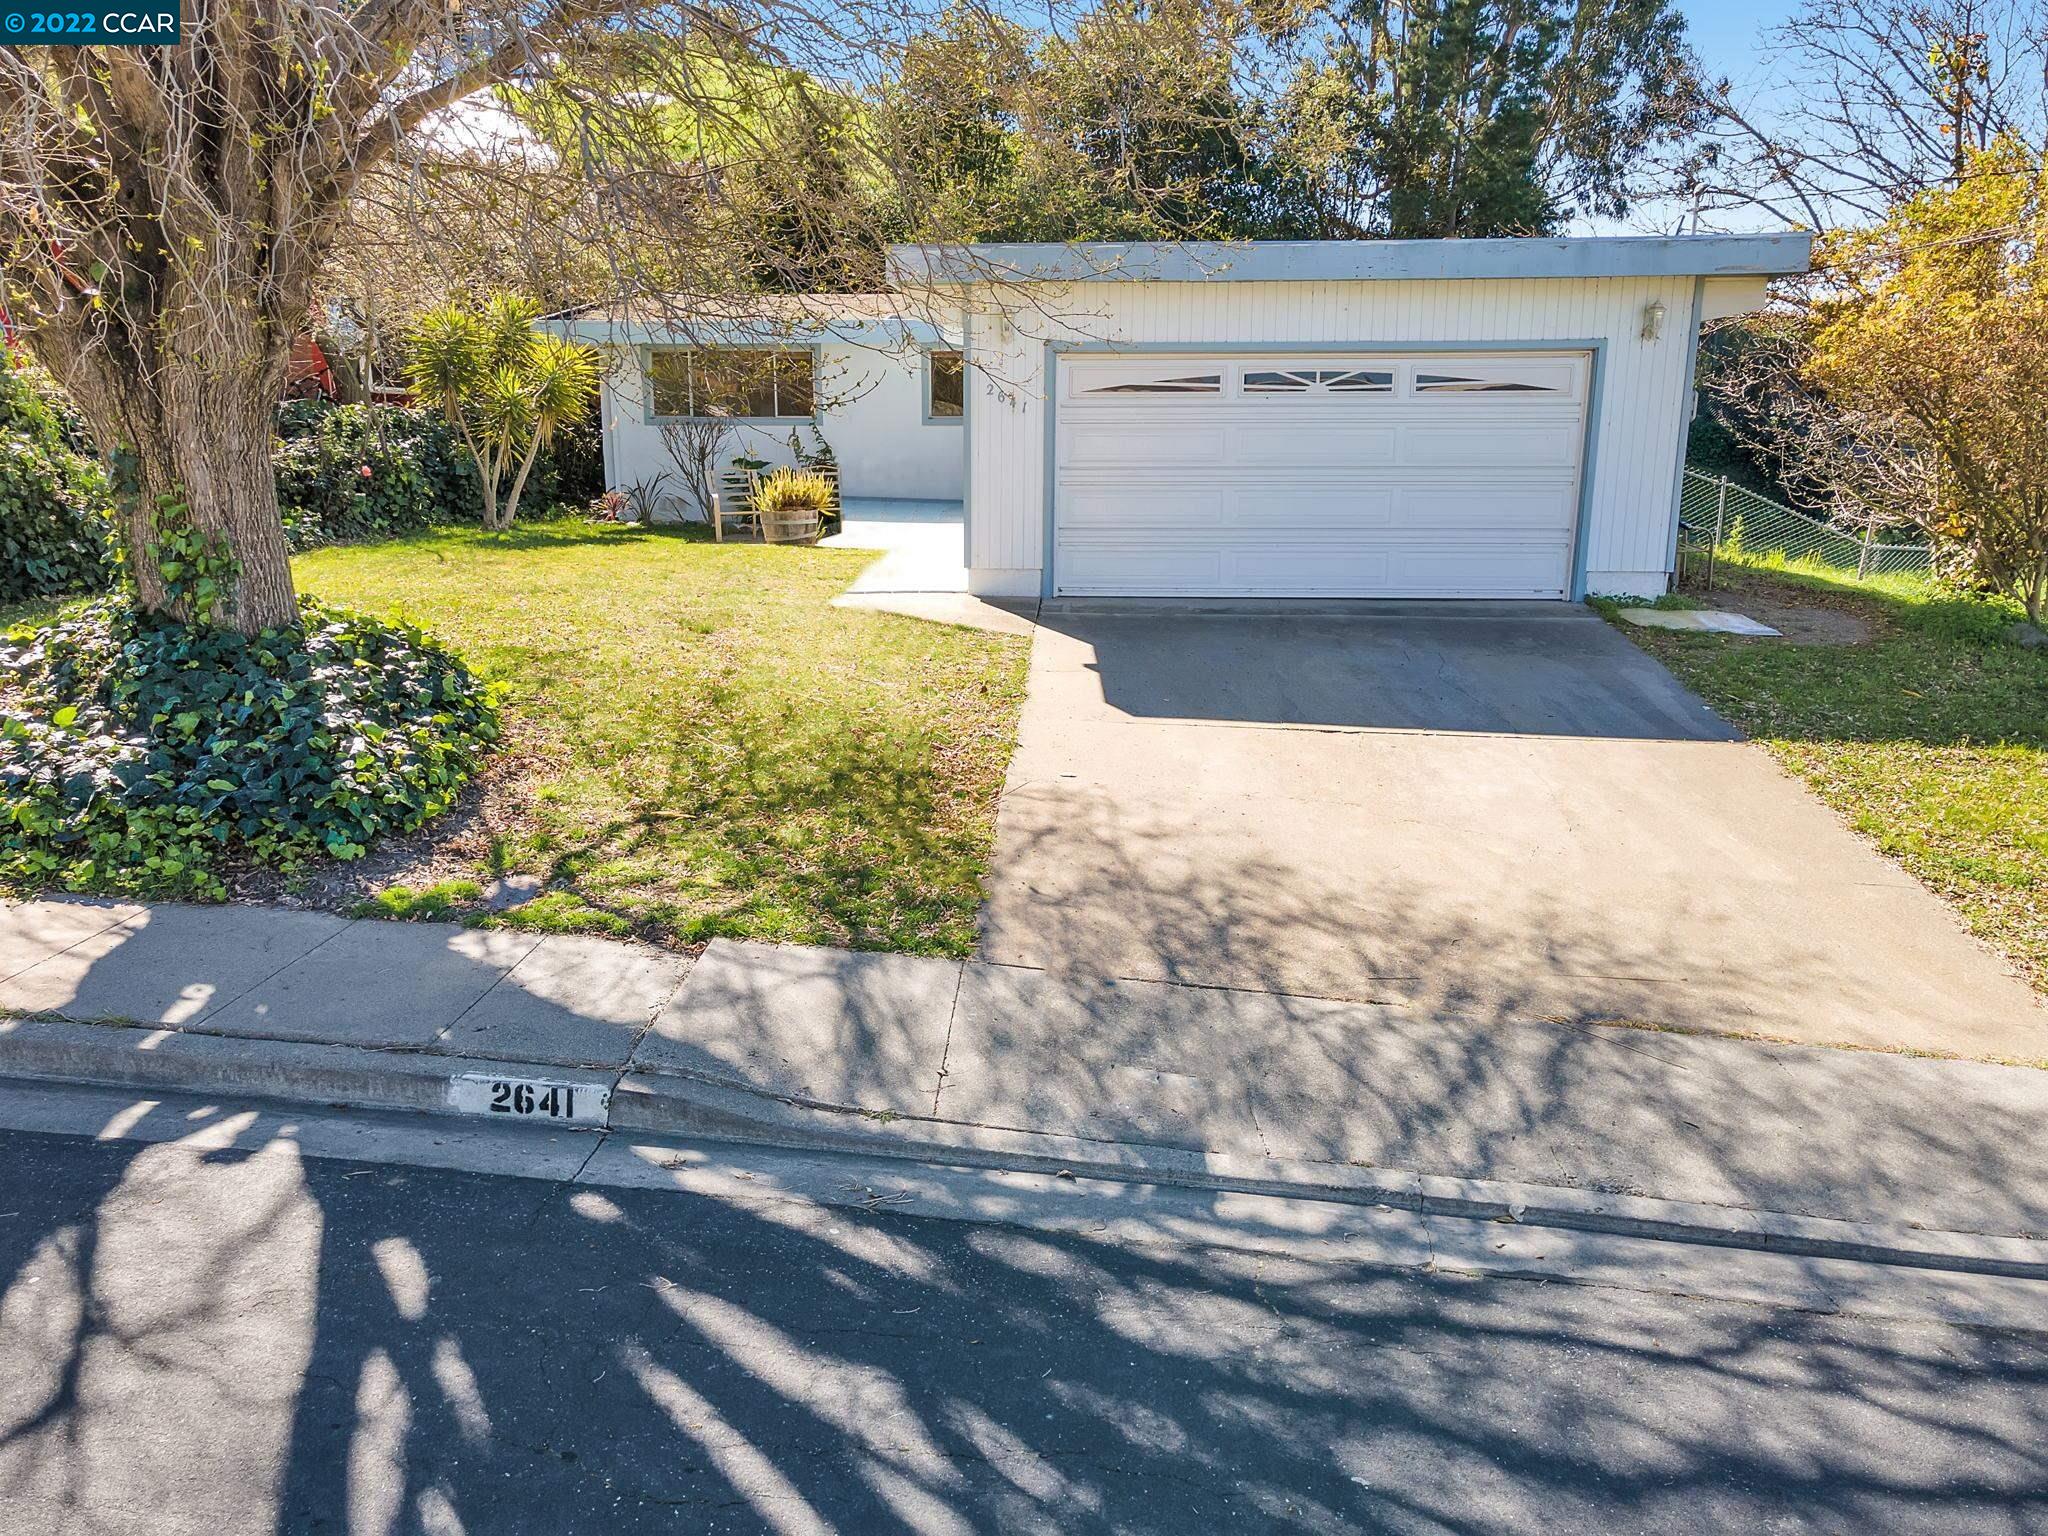 Photo of 2641 Brian Rd in San Pablo, CA